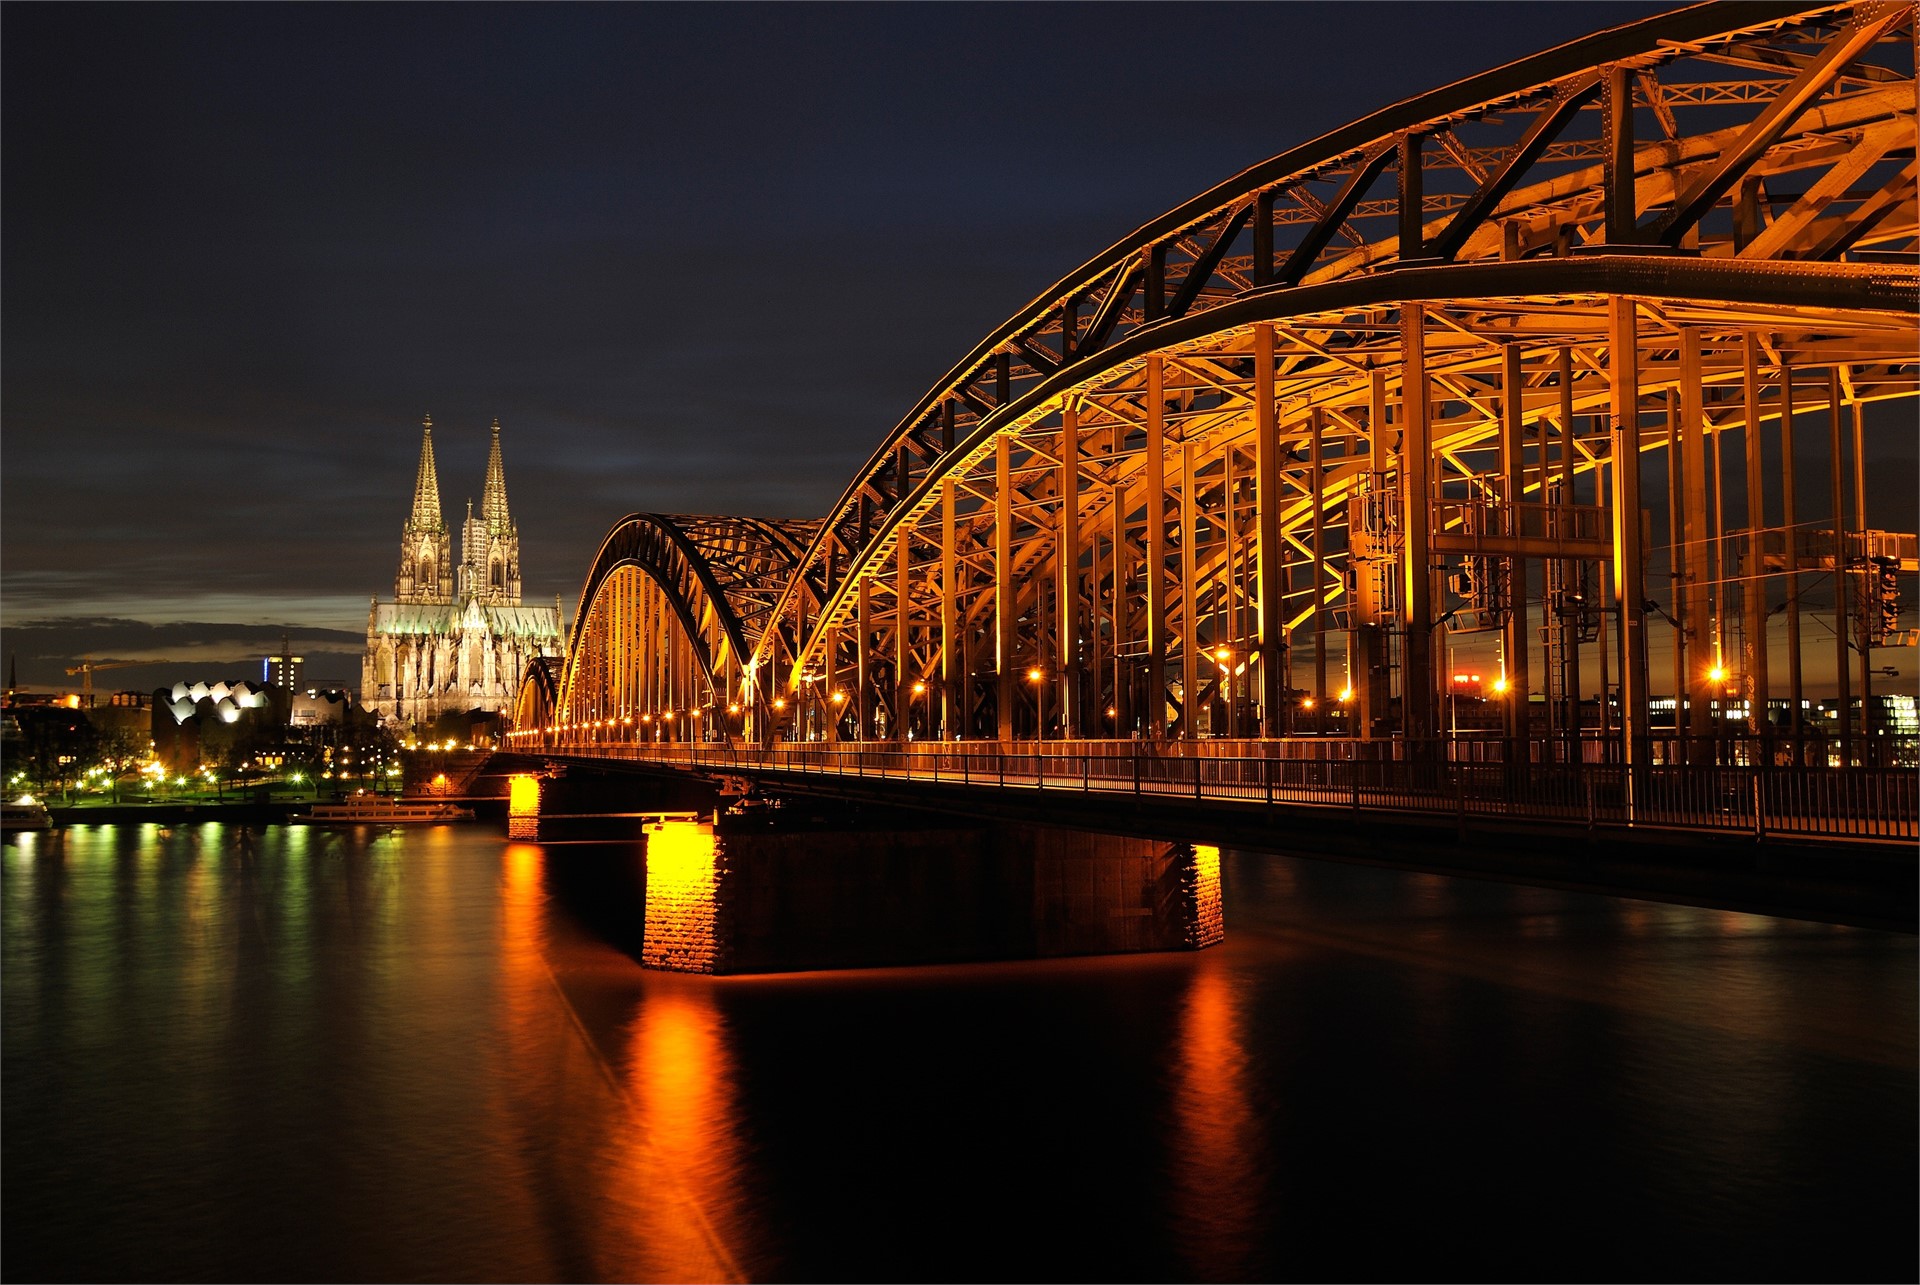 Hotels and accommodation in Cologne, Germany